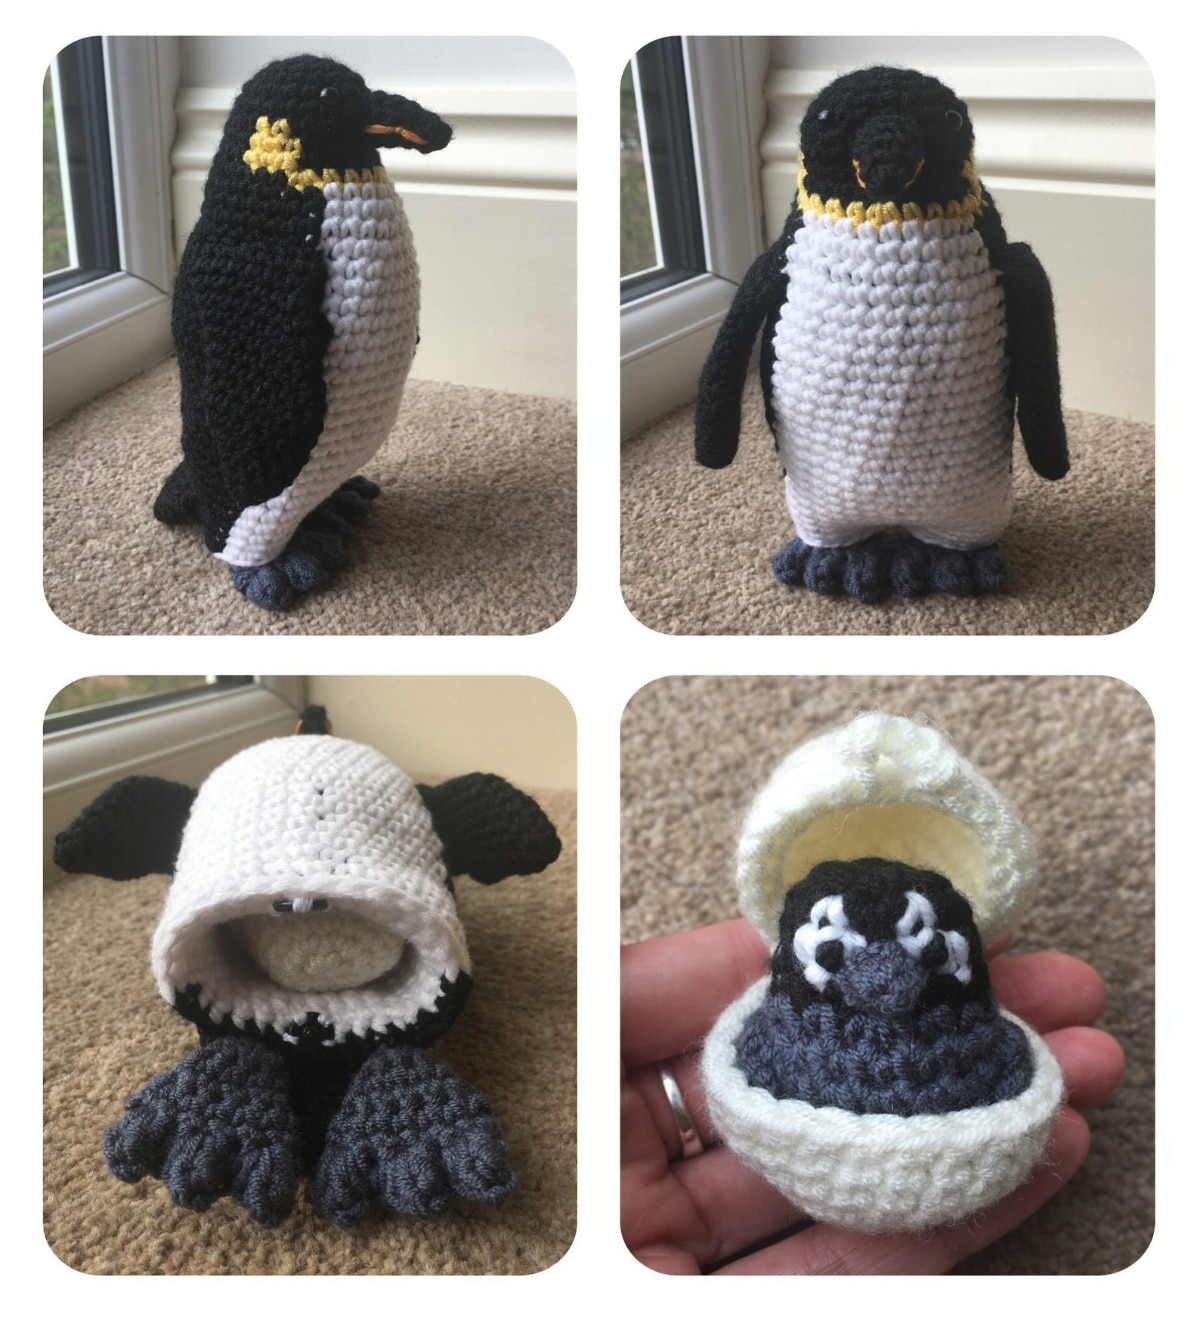 Large crochet Emperor black and white penguin standing with a black chick penguin sitting in a white egg.